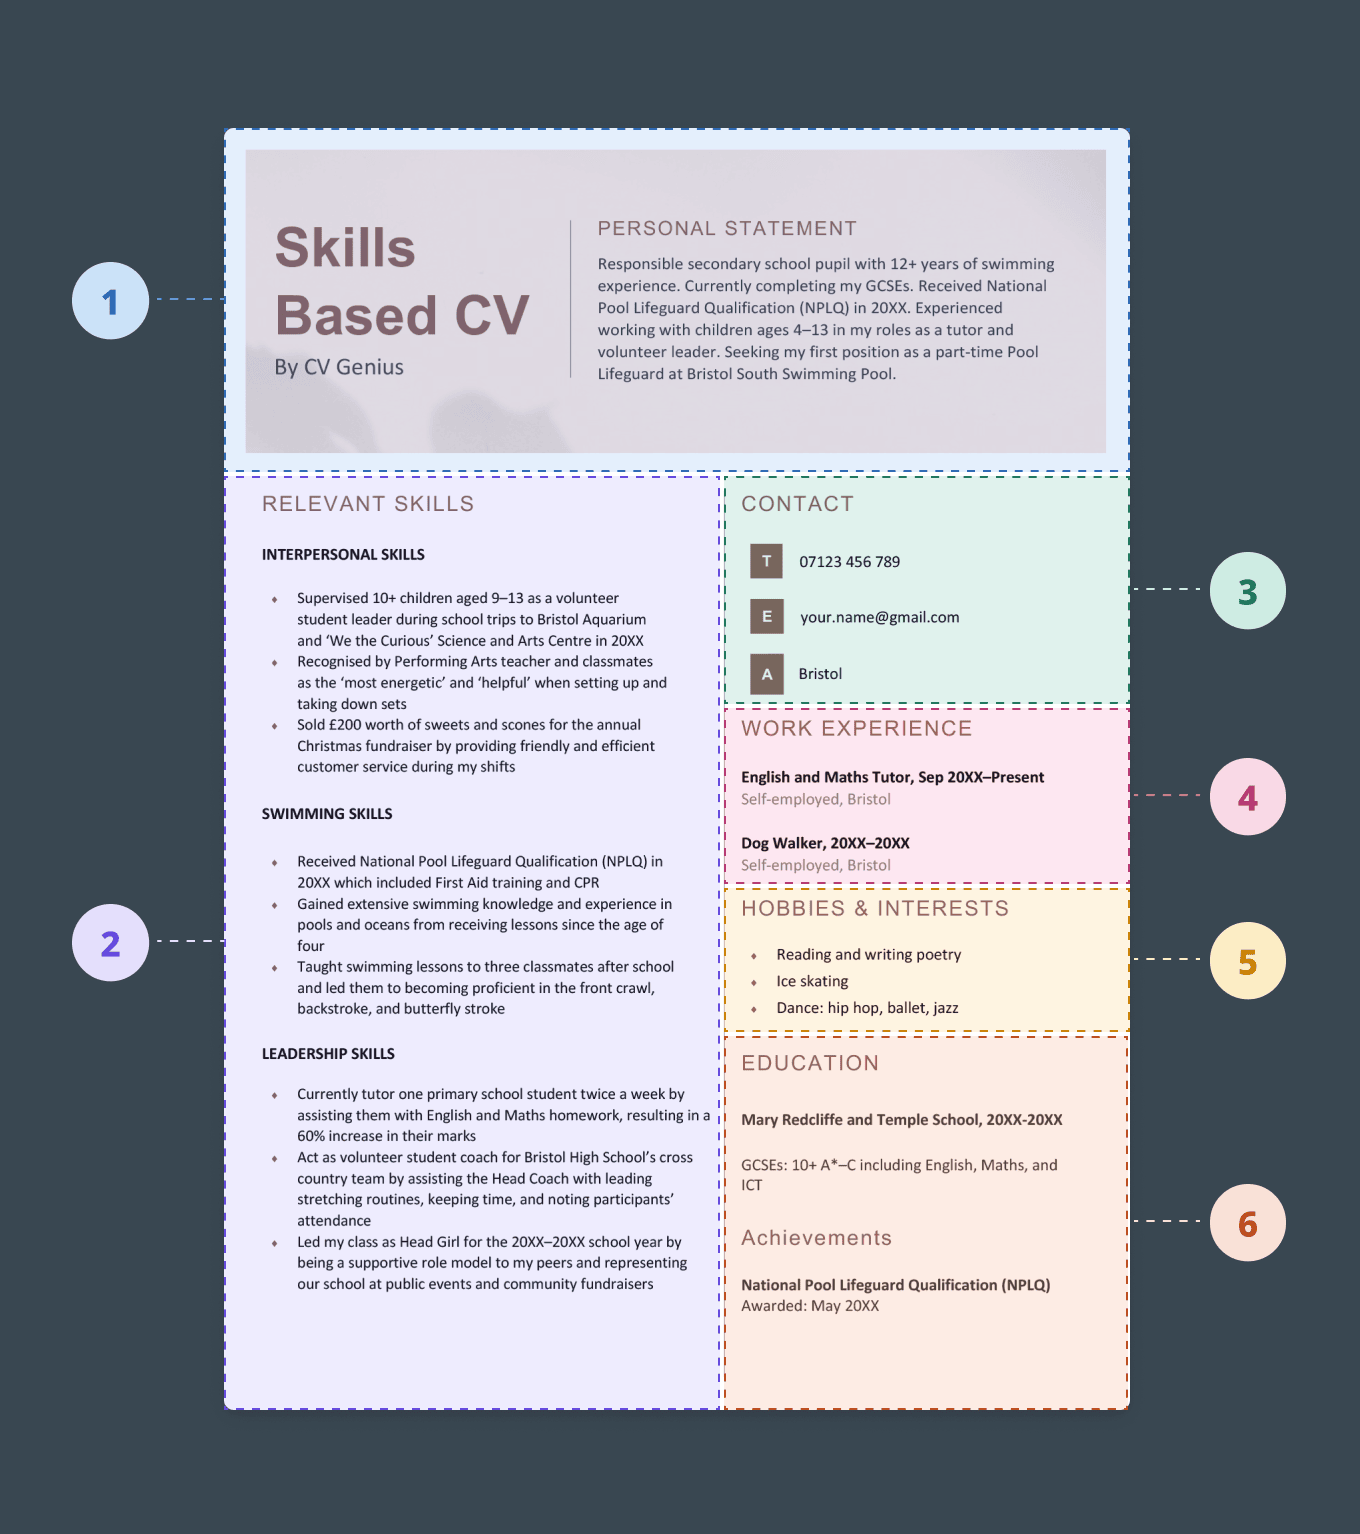 A skills based cv example with a pink header and skills, contact, work experience, and hobbies & interests sections arranged in two columns below the header.